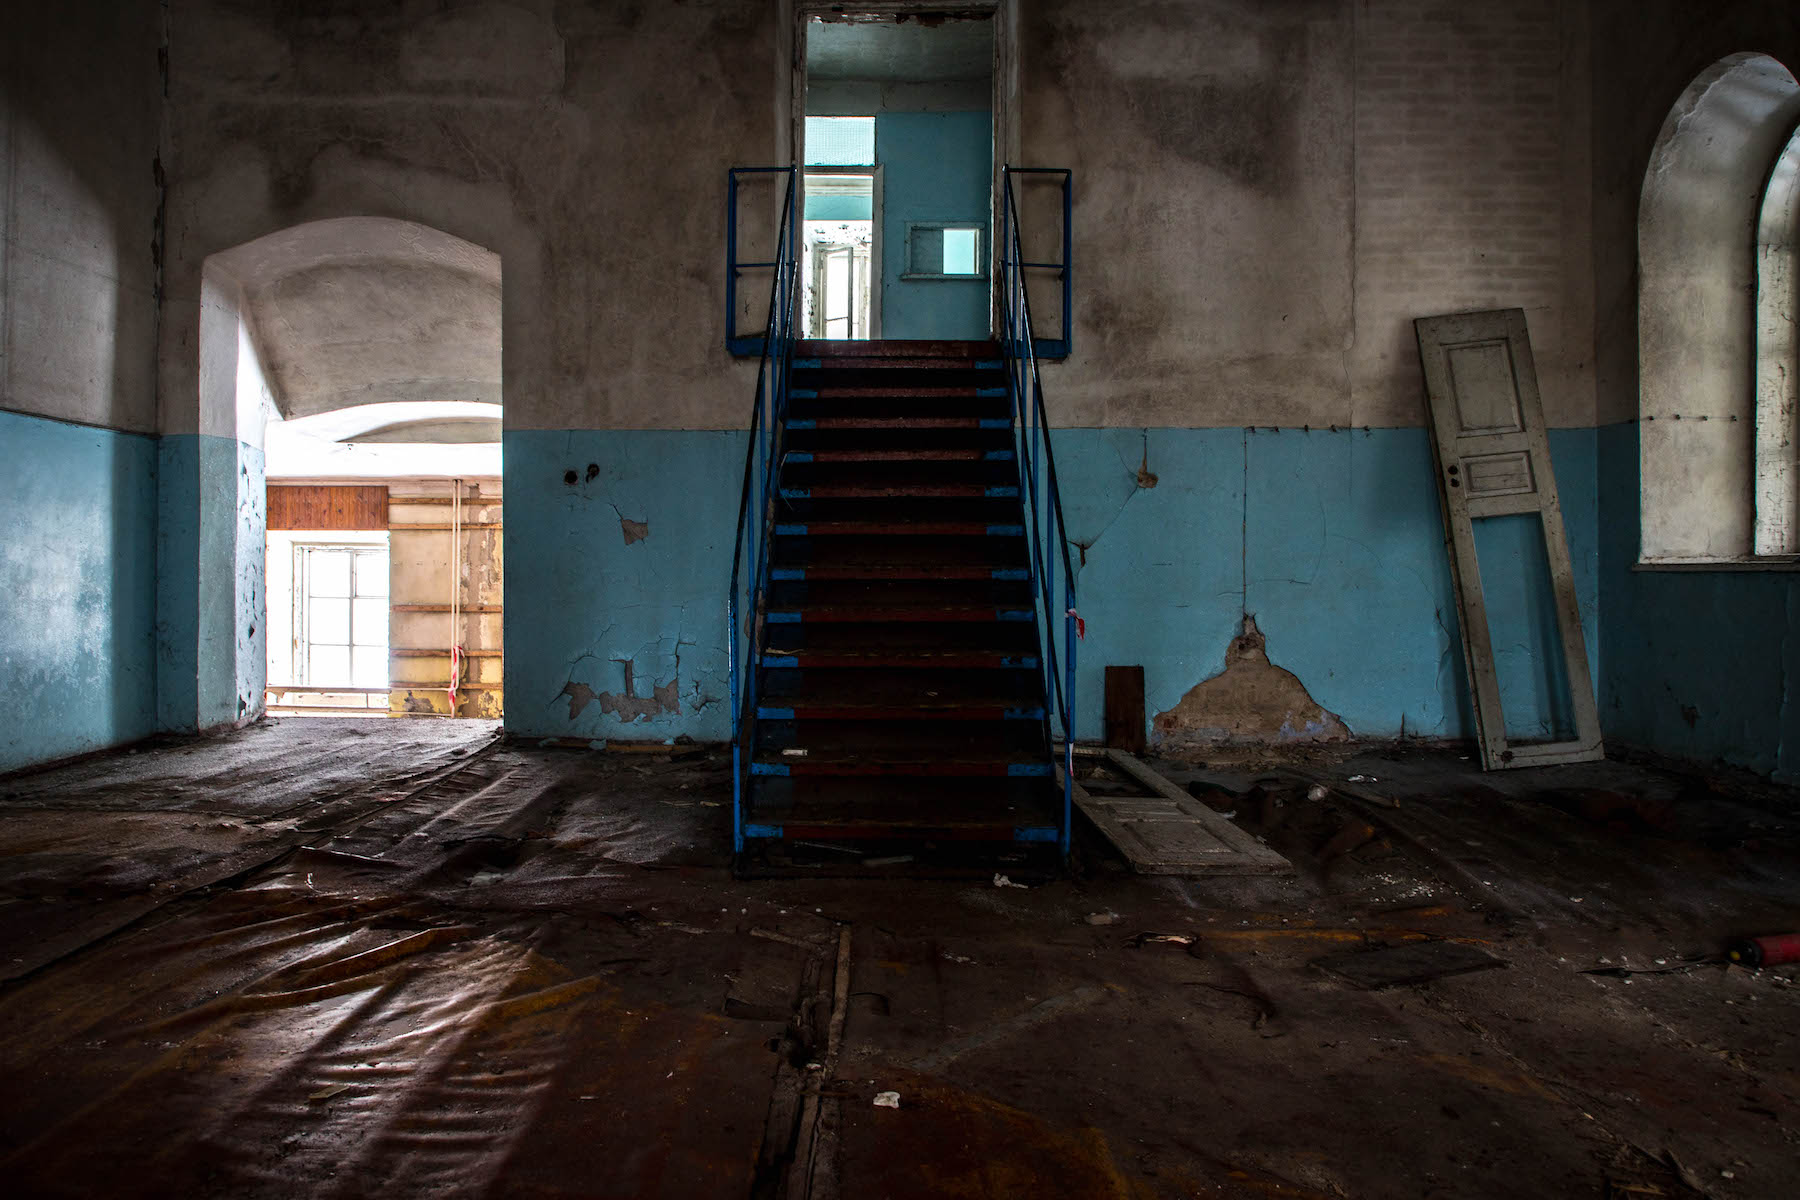 The main hall inside the former synagogue in Chernobyl town. Originally the heart of Chernobyl’s Jewish community, after WWII and the loss of many Jewish lives, this building was commandeered by the Soviet military, who used it until the disaster as a recruitment office. Today it is abandoned and severely decayed. © Darmon Richter